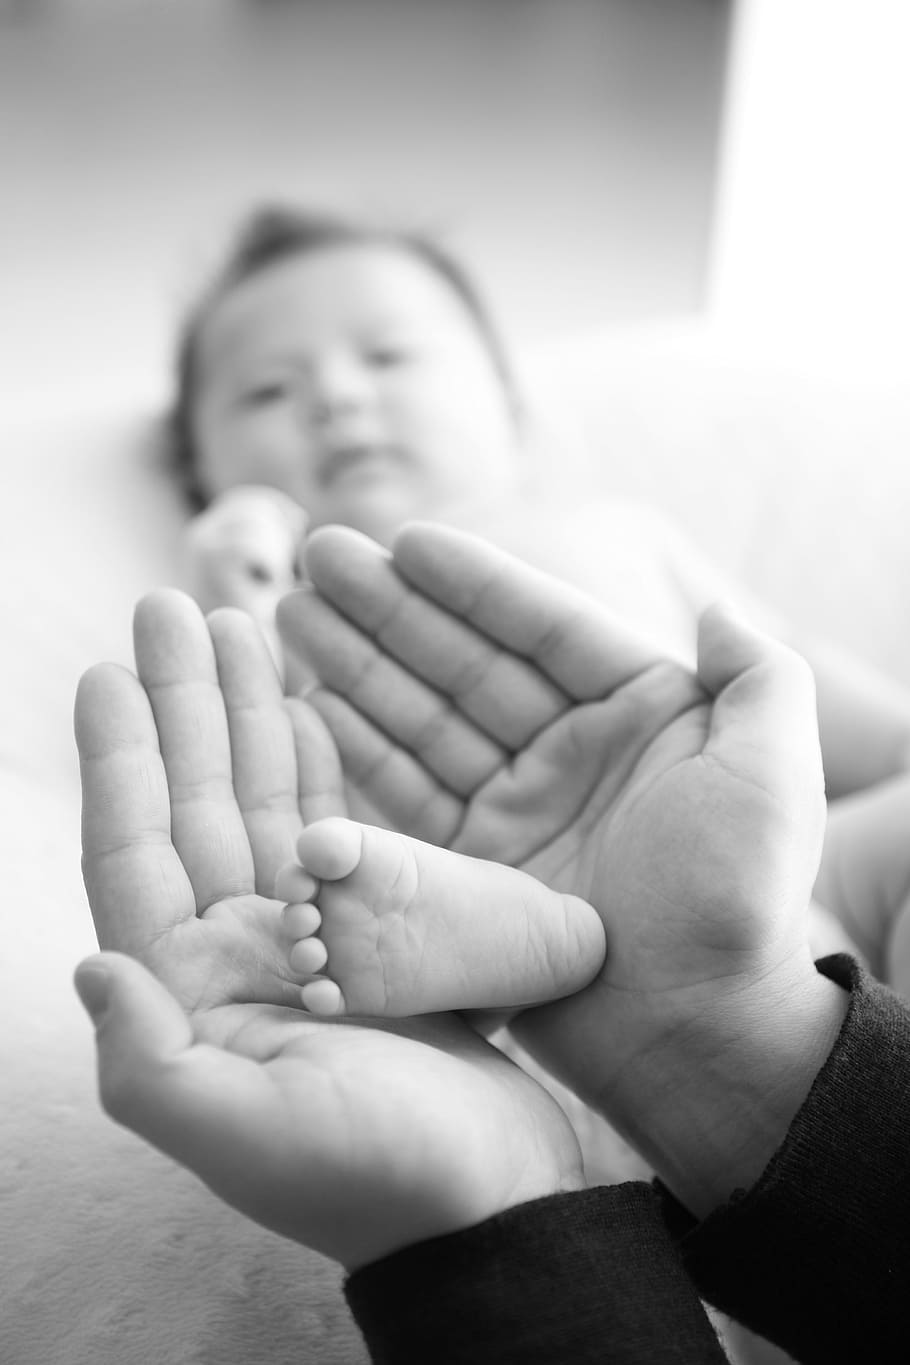 selective focus grayscale photography of baby's right foot on person's hands